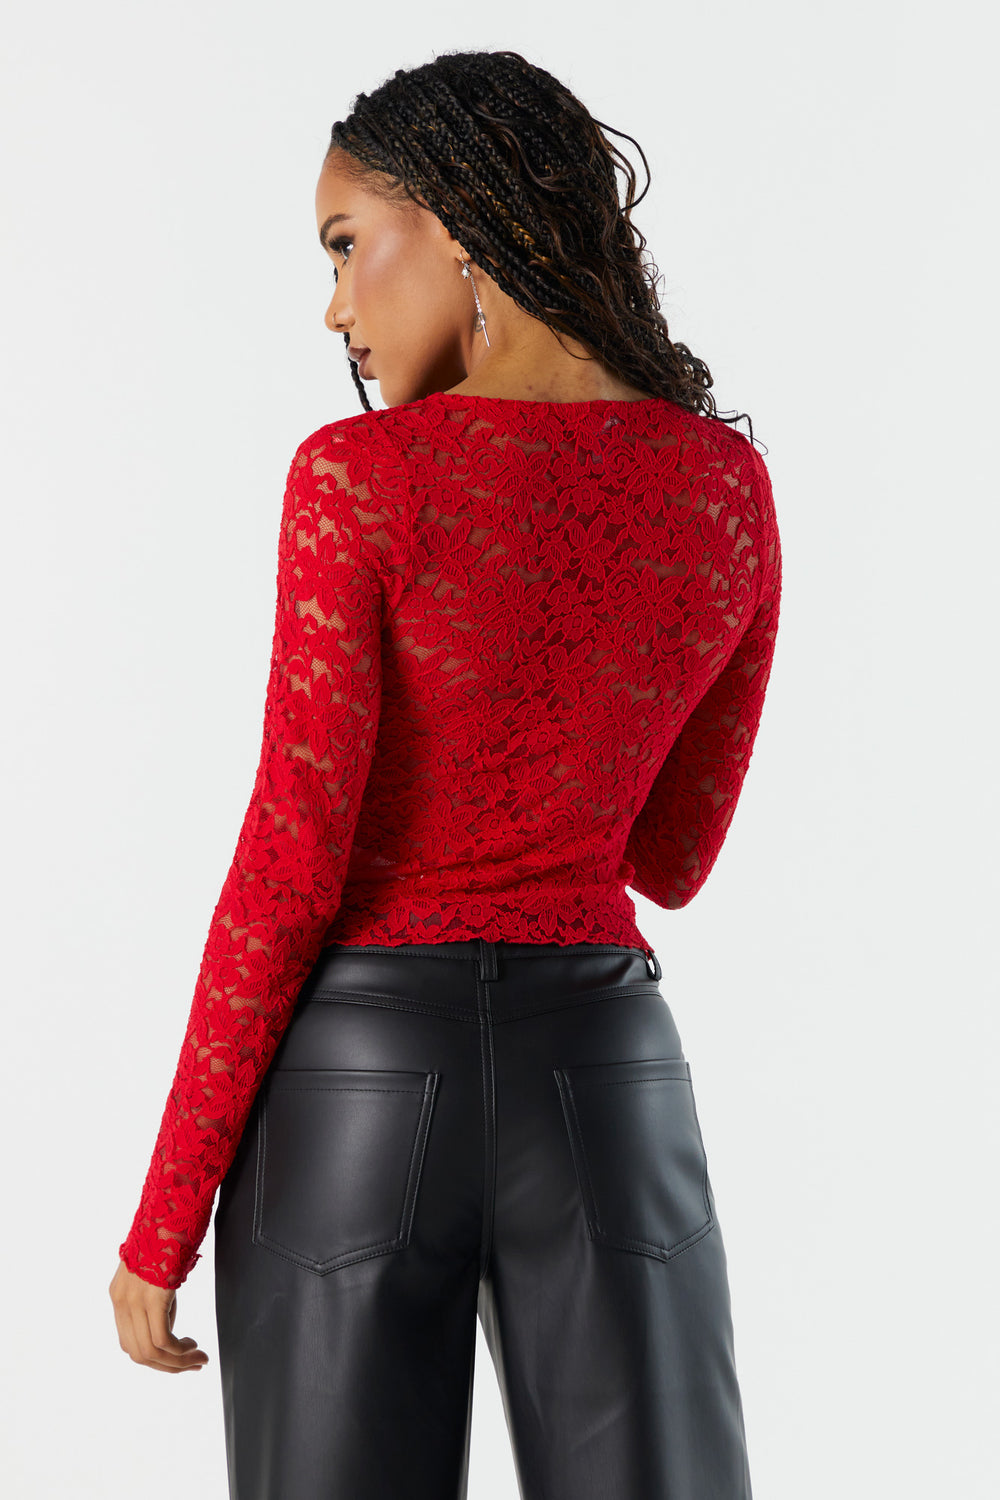 Floral Lace Bustier Long Sleeve Top Floral Lace Bustier Long Sleeve Top 3